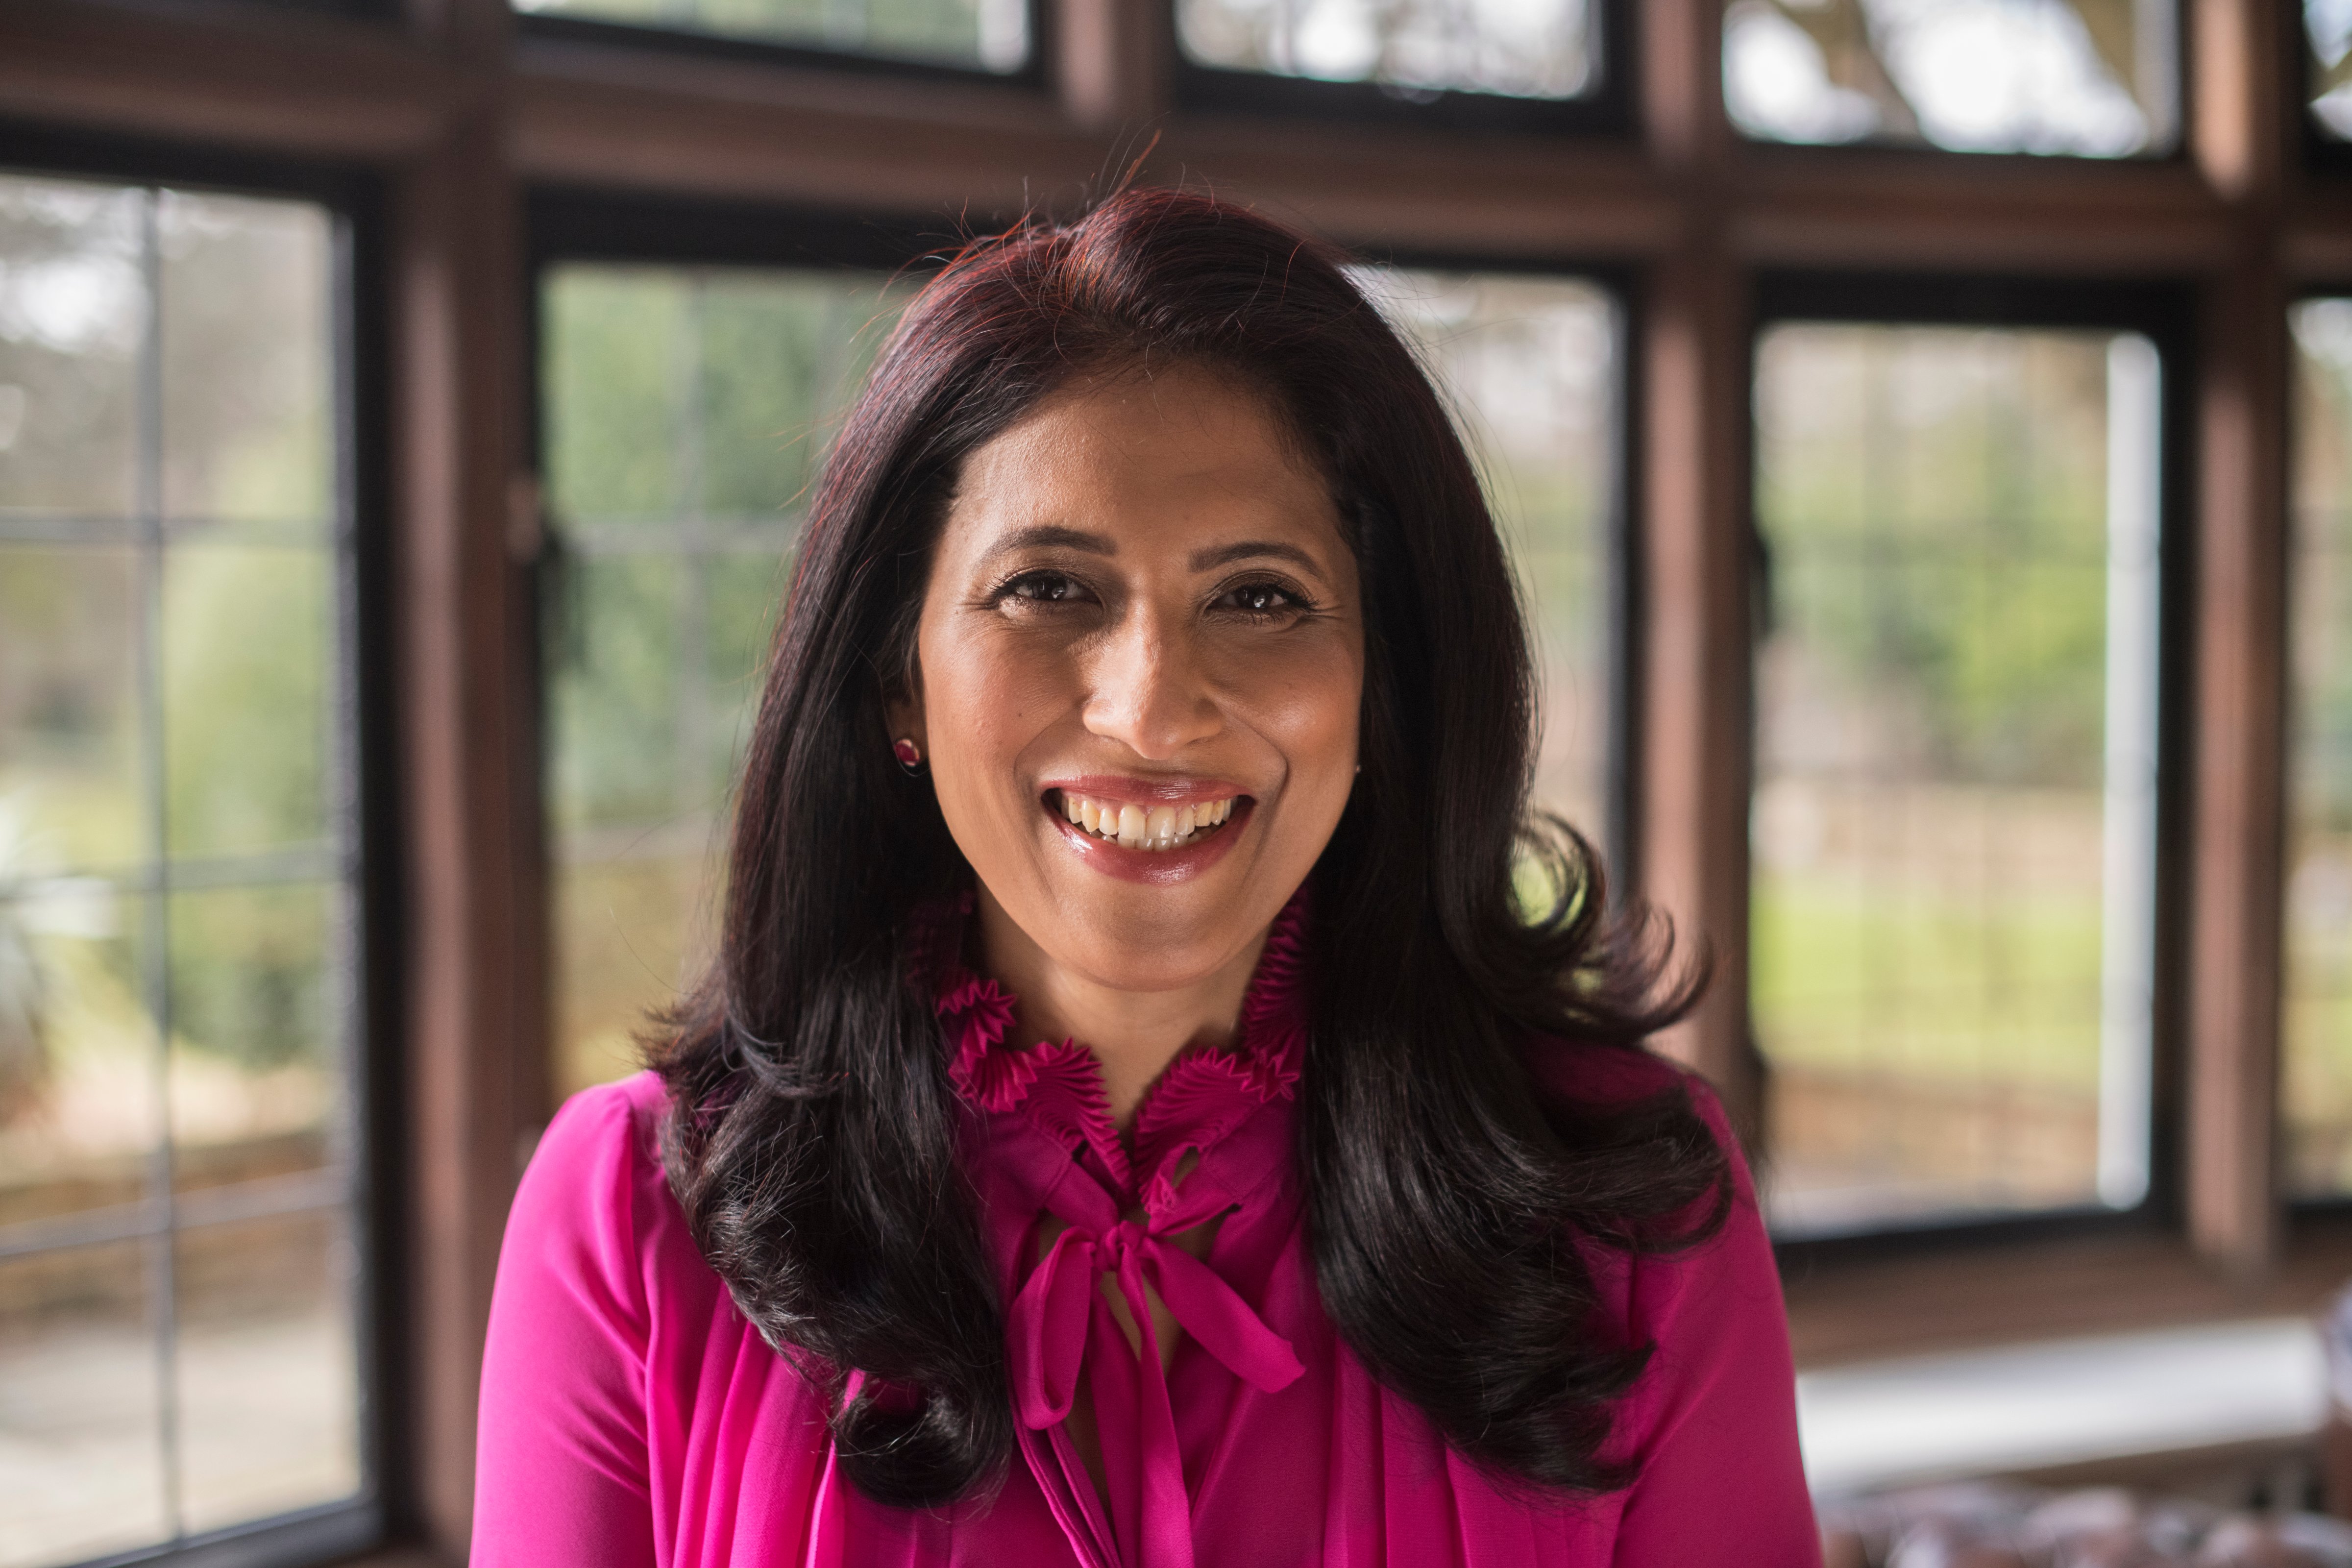 Leena Nair, Unilever's Chief Human Resources Officer (Courtesy of Unilever, Andrew Parsons)